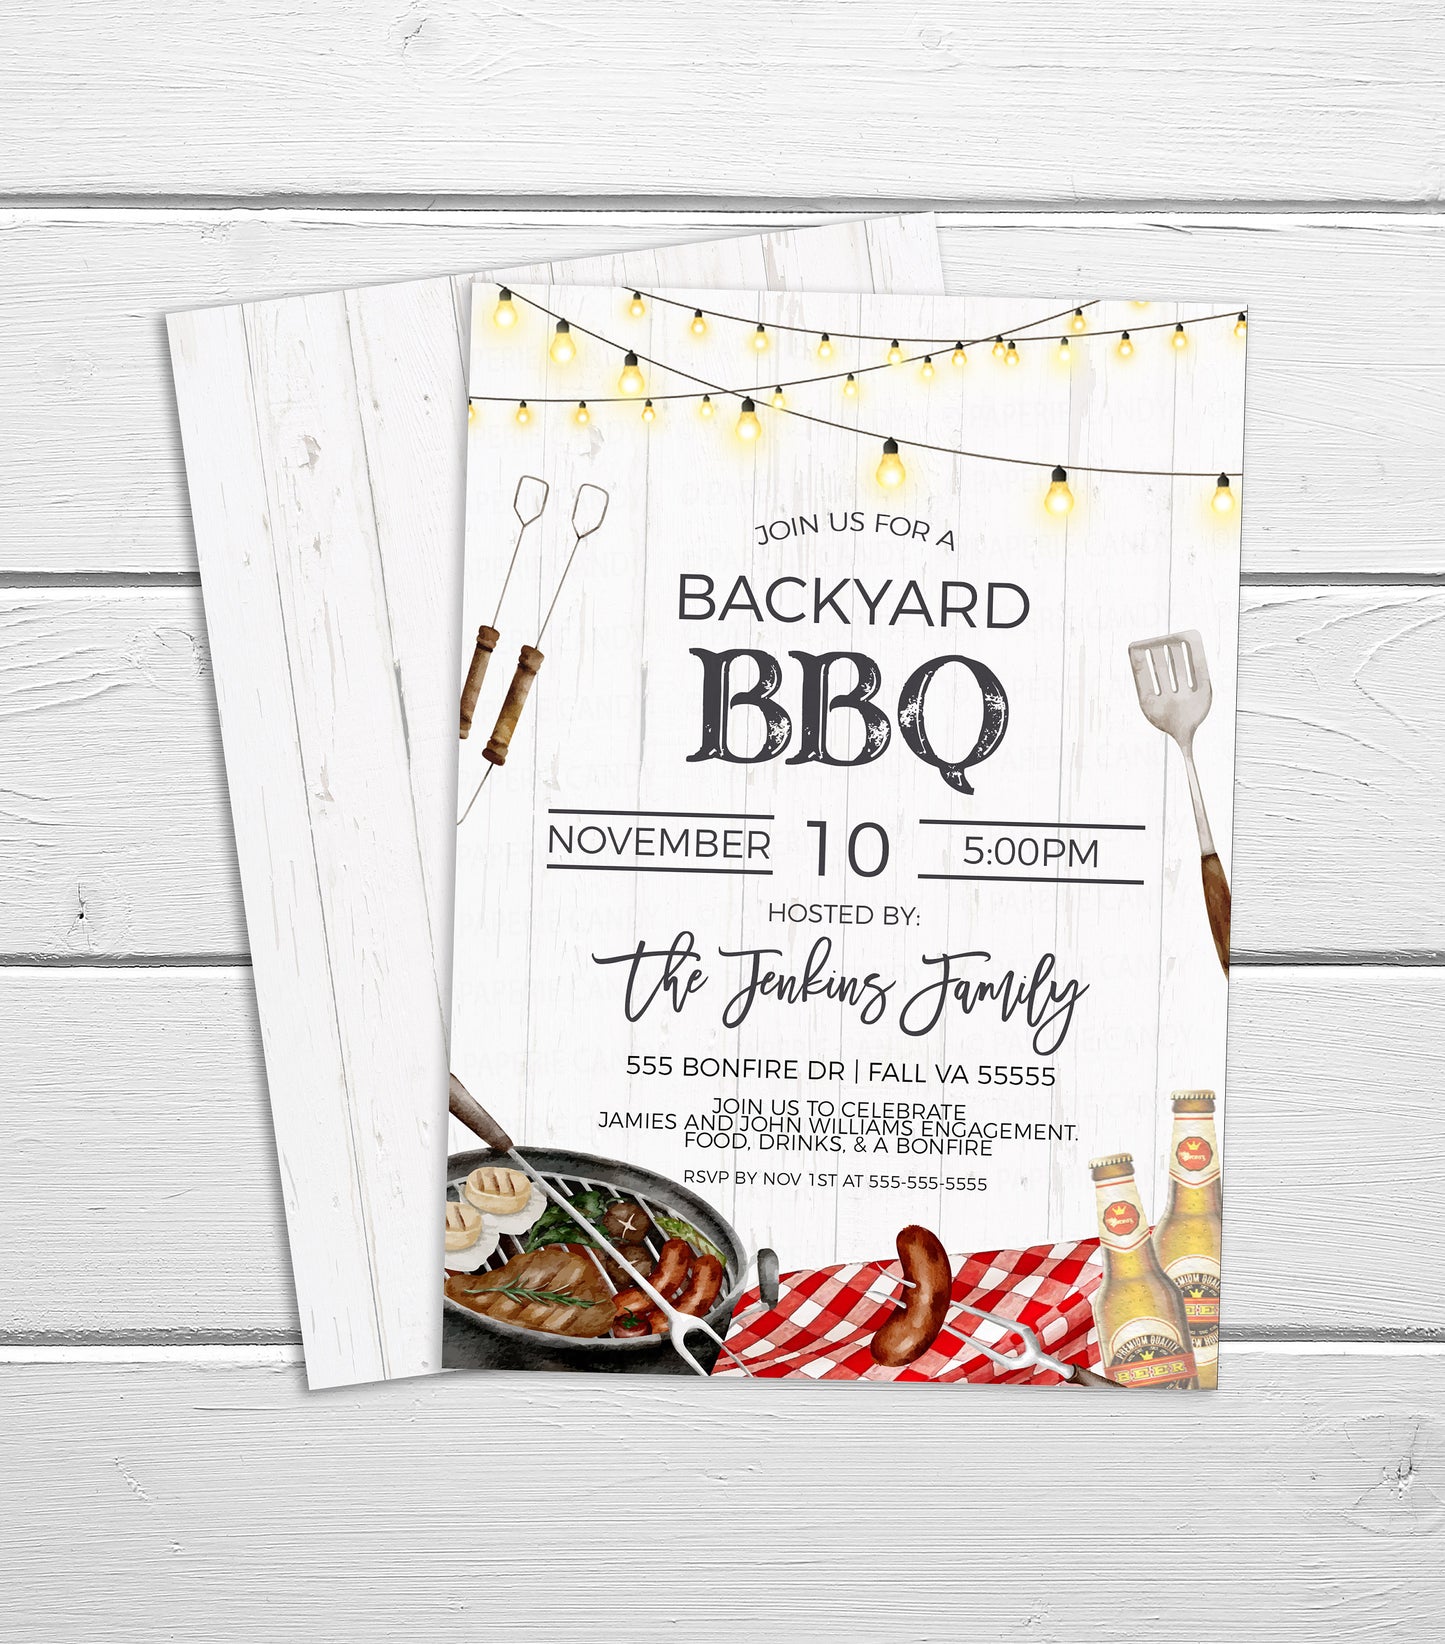 Backyard BBQ Invitation, Barbeque Burgers Beer Invite, Grilling Cookout Barbecue Party, Fall Summer Event Shower Editable Printable Template